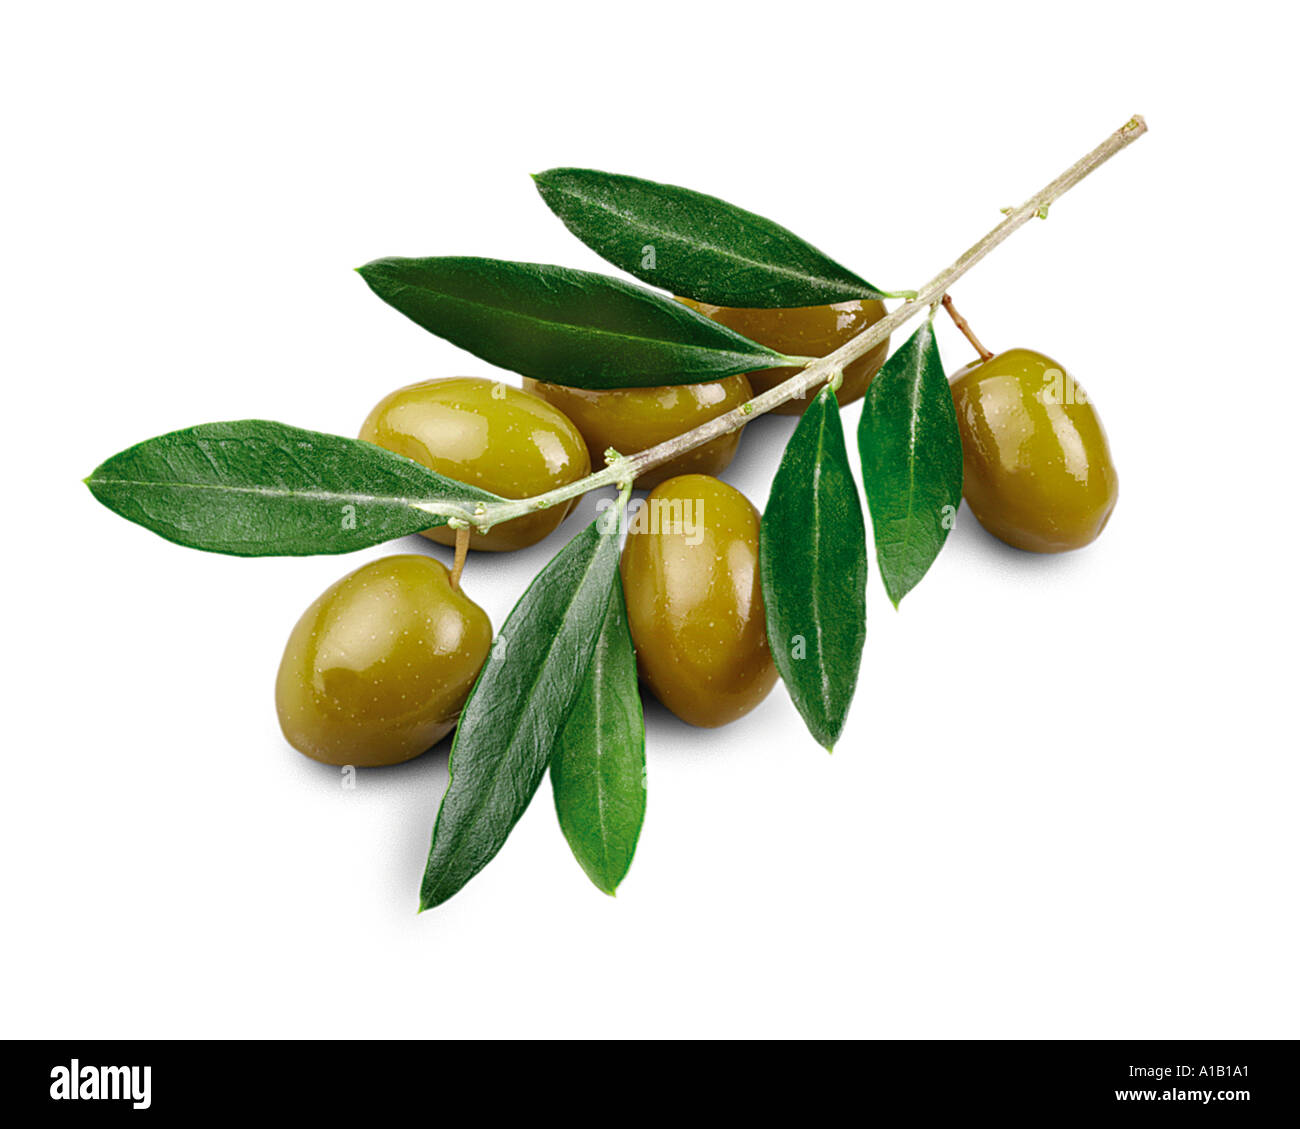 green olives on branch Stock Photo